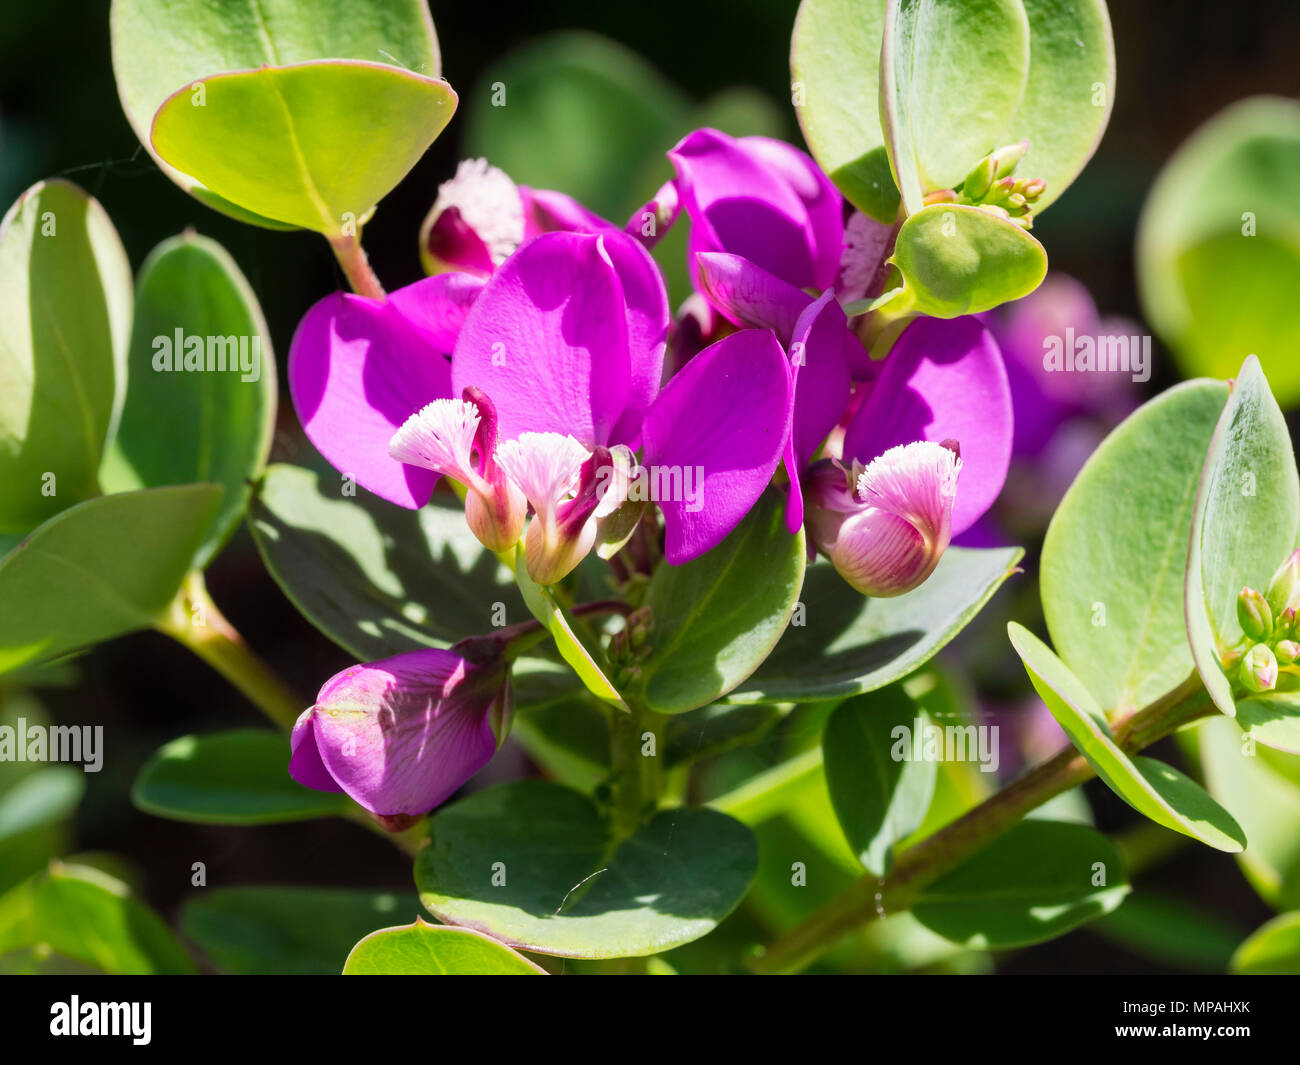 Long flowering purple pink blooms of the South African evergreen shrub, Polygala fruticosa 'Africana' Stock Photo